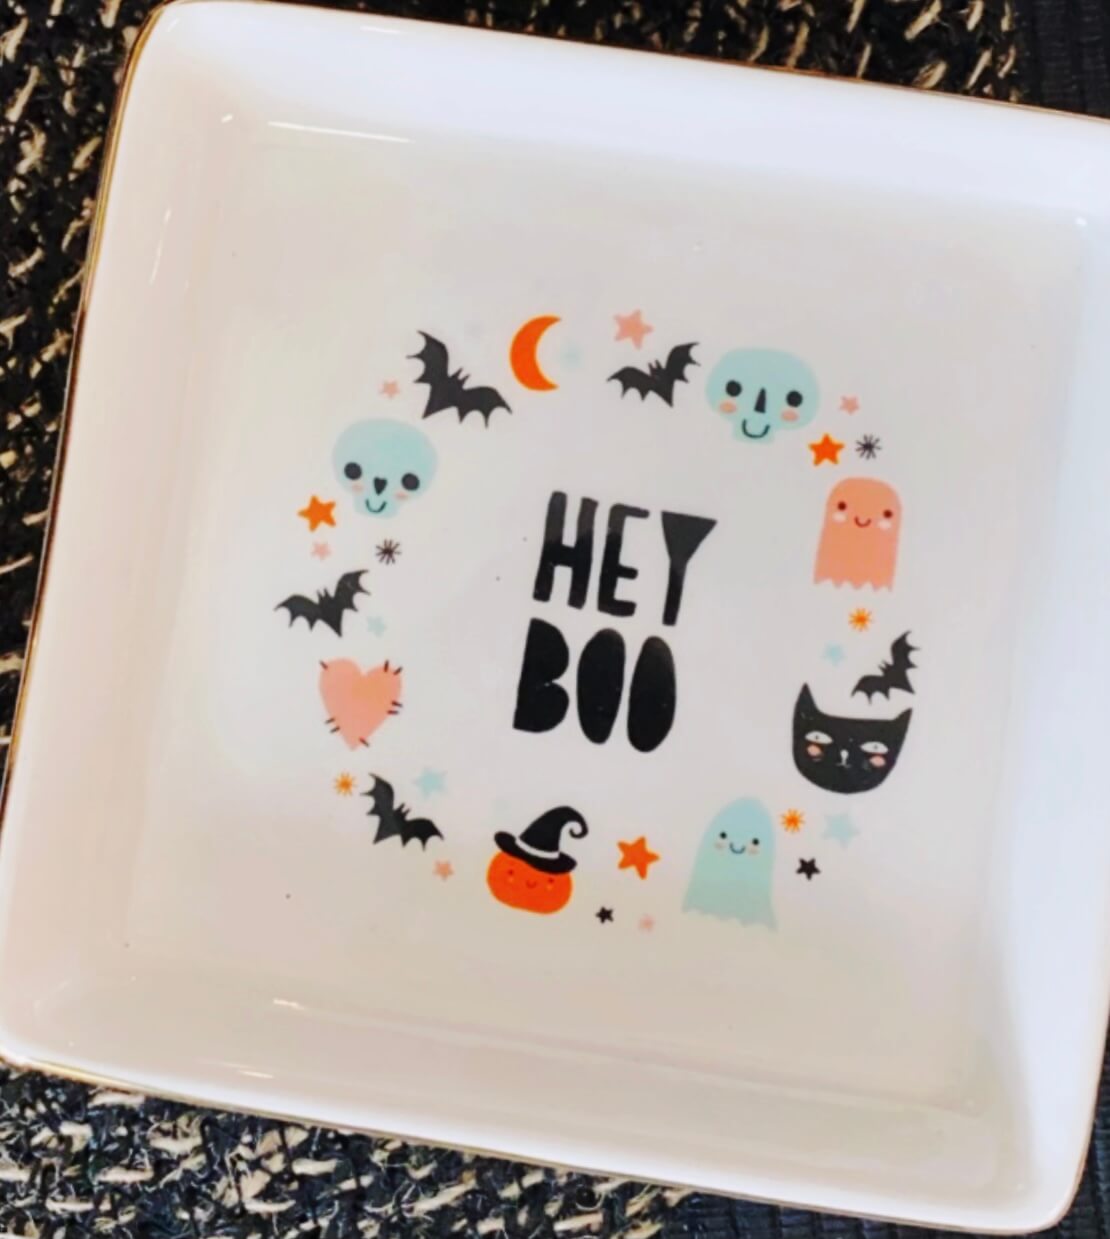 Halloween Decorative Plate That Says "Hey Boo"